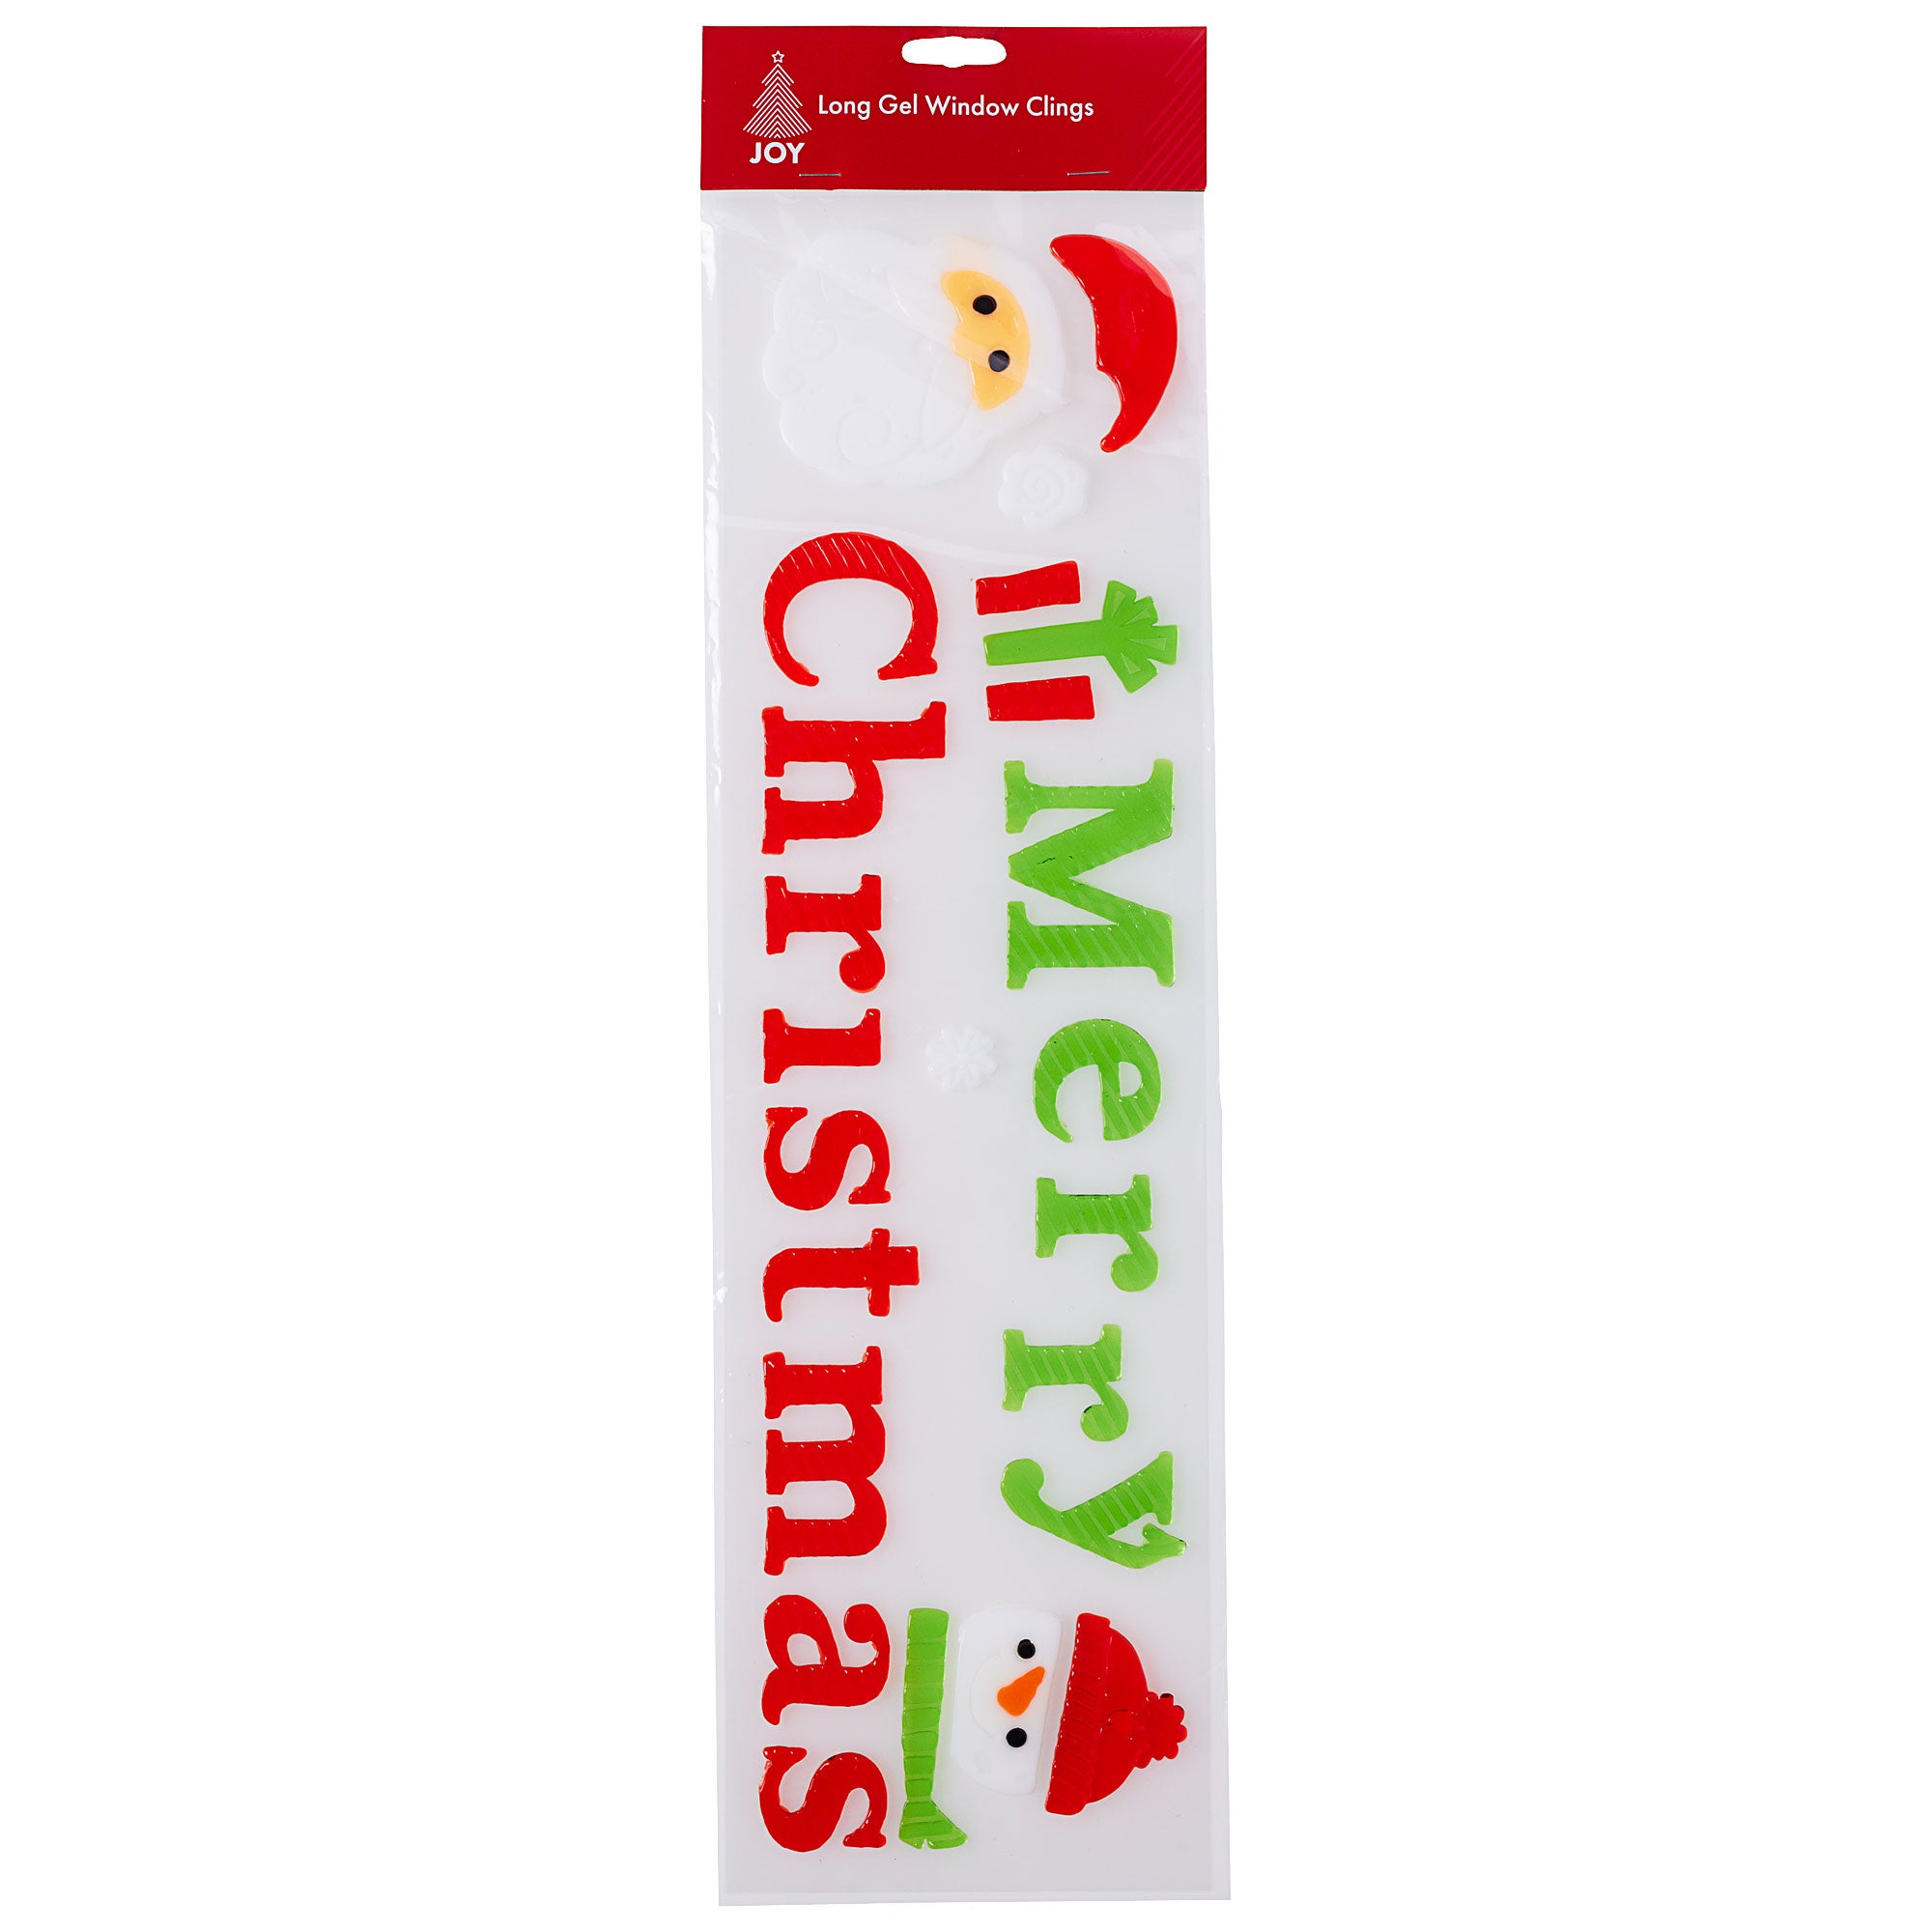 Christmas Gel Window Cling Long Assorted | The Reject Shop